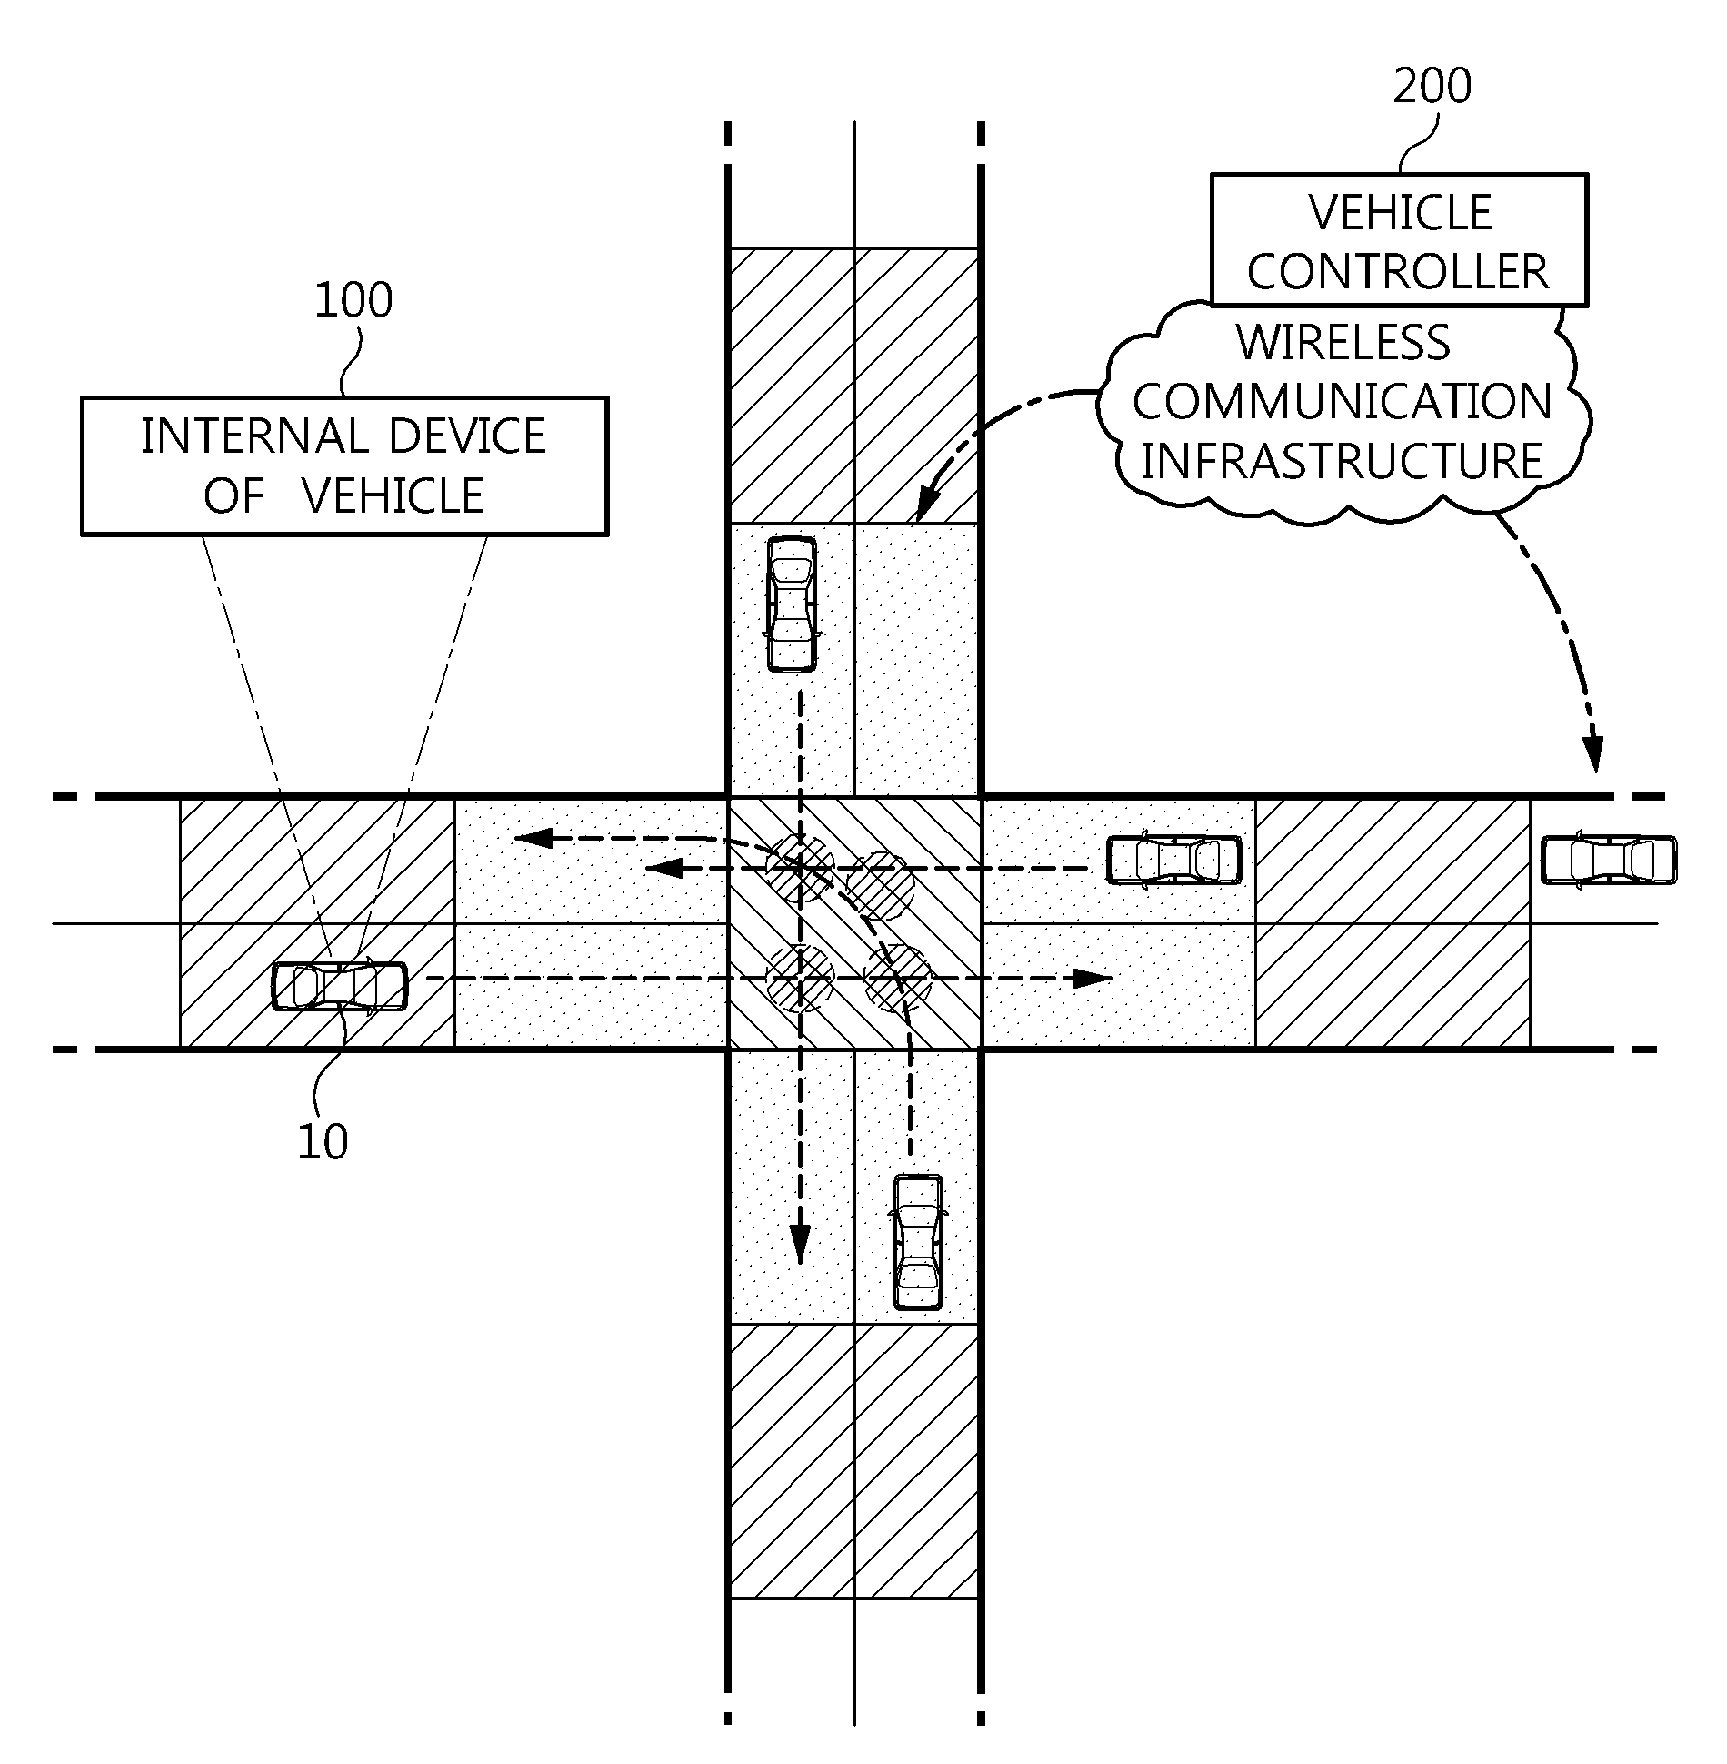 Apparatus and method for controlling vehicle at autonomous intersection